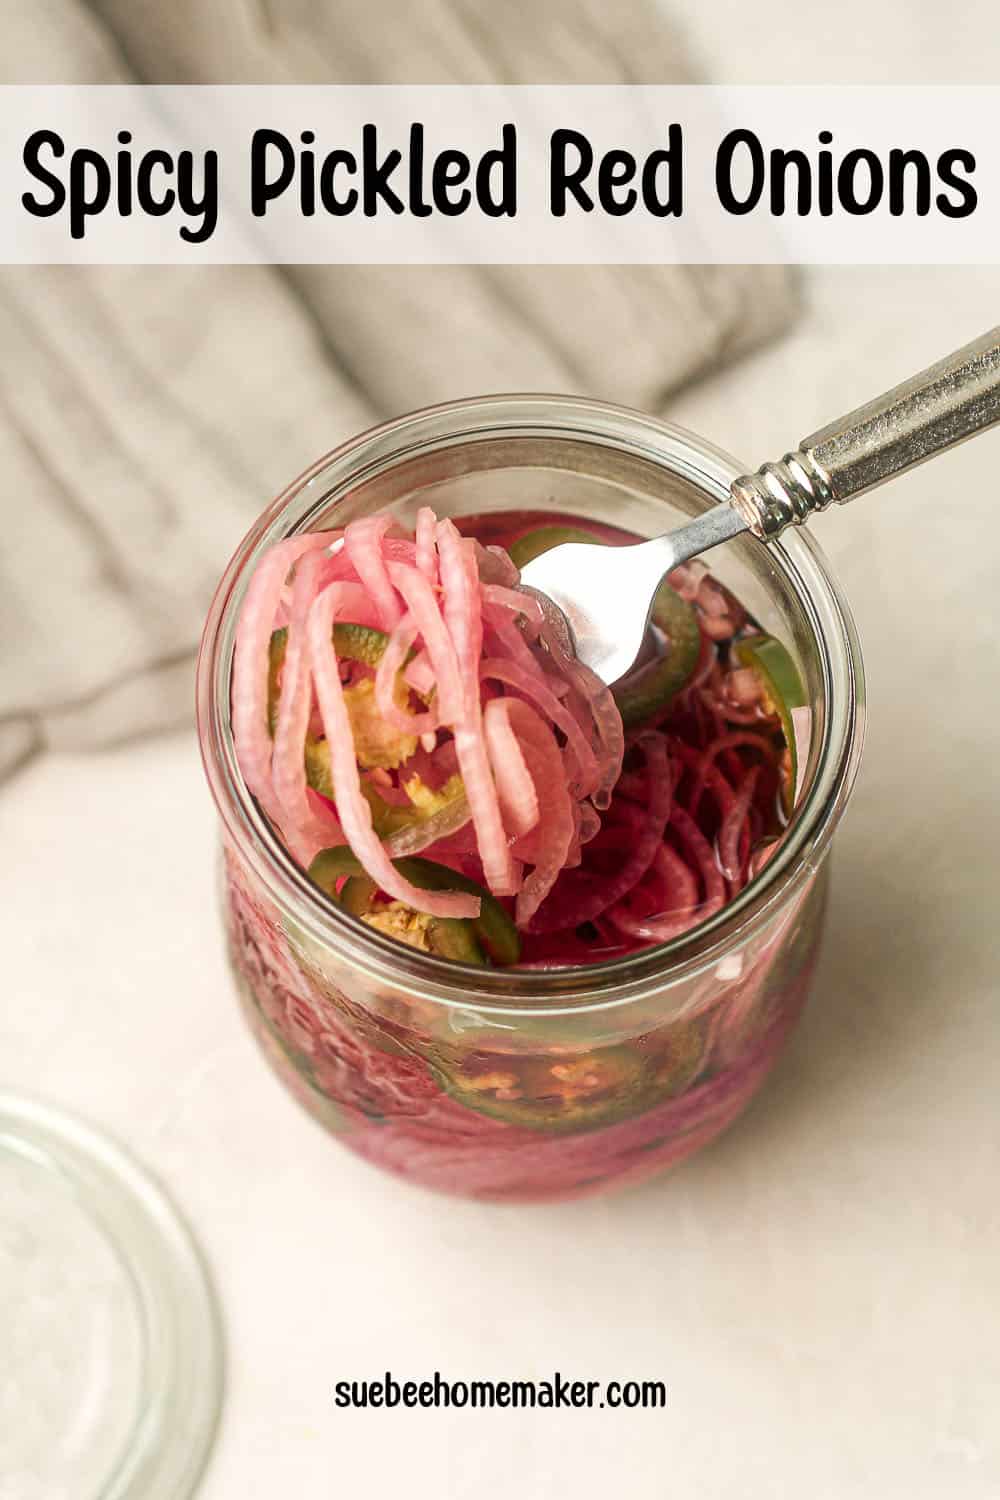 Overhead view of a large jar of spicy pickled red onions with a fork lifting some out.